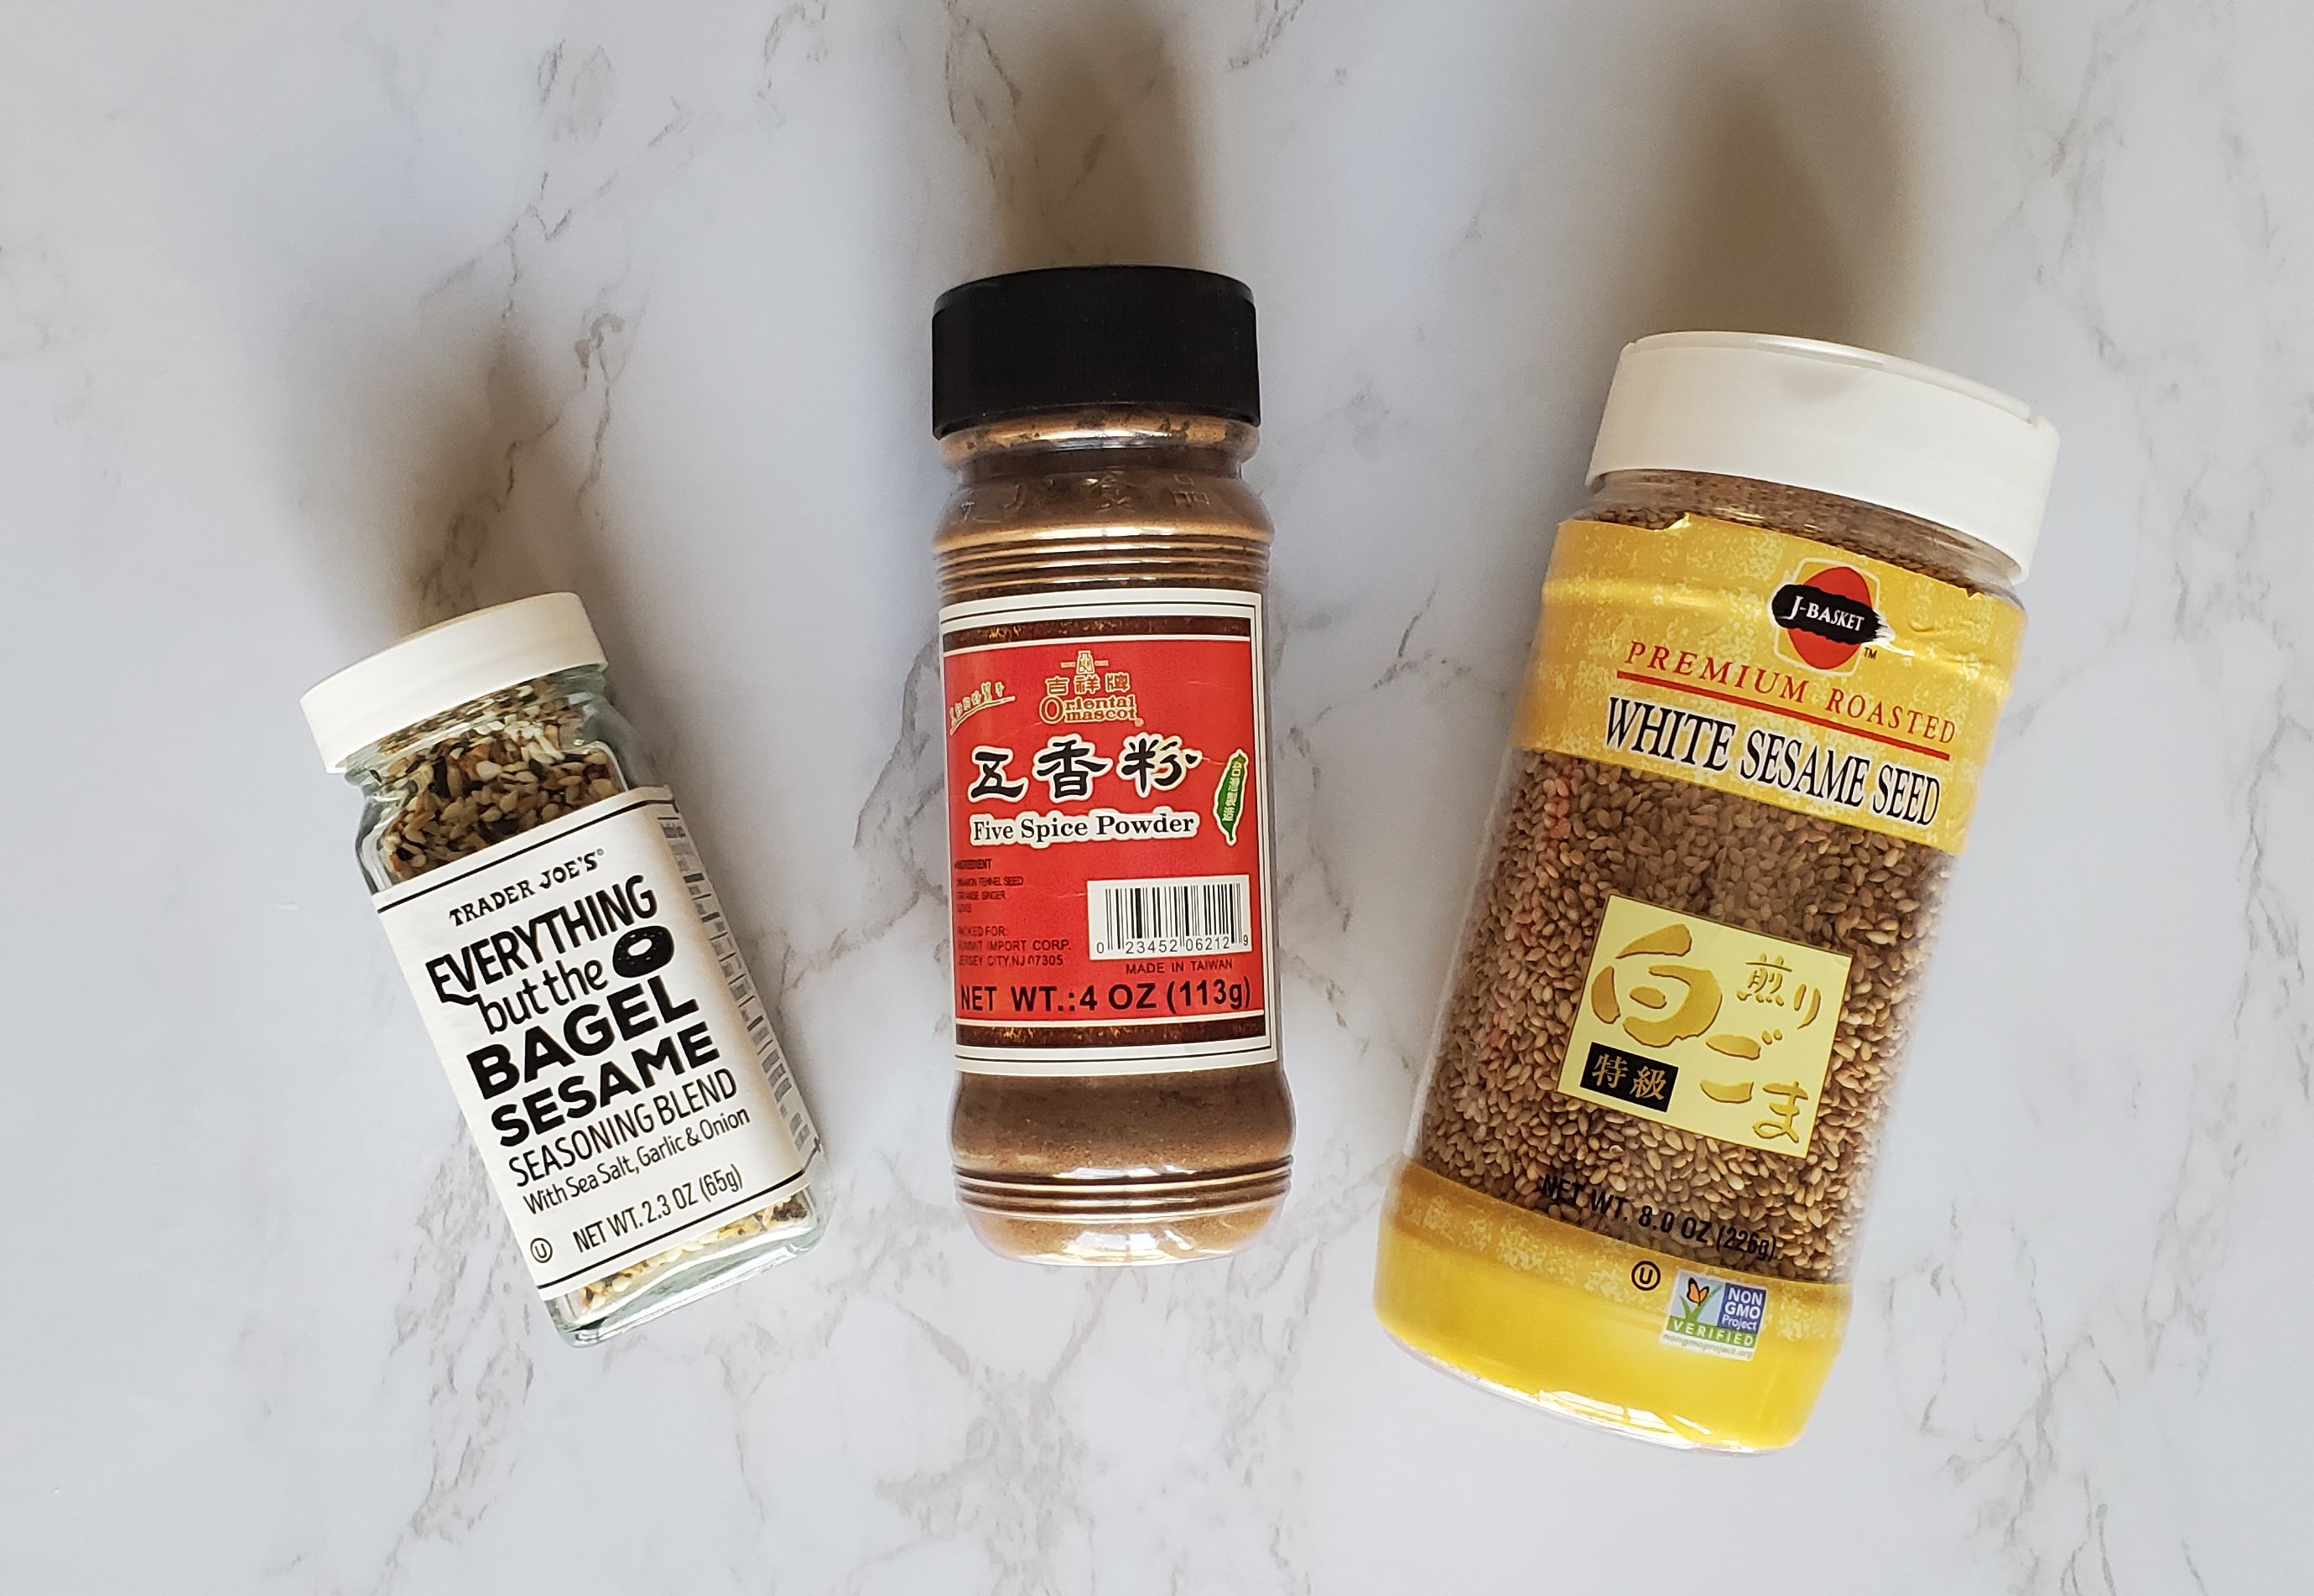 From left to right, a small jar of Trader Joe's Everything But the Bagel Seasoning, a jar or Chinese Five Spice and a large jar of white sesame seeds.